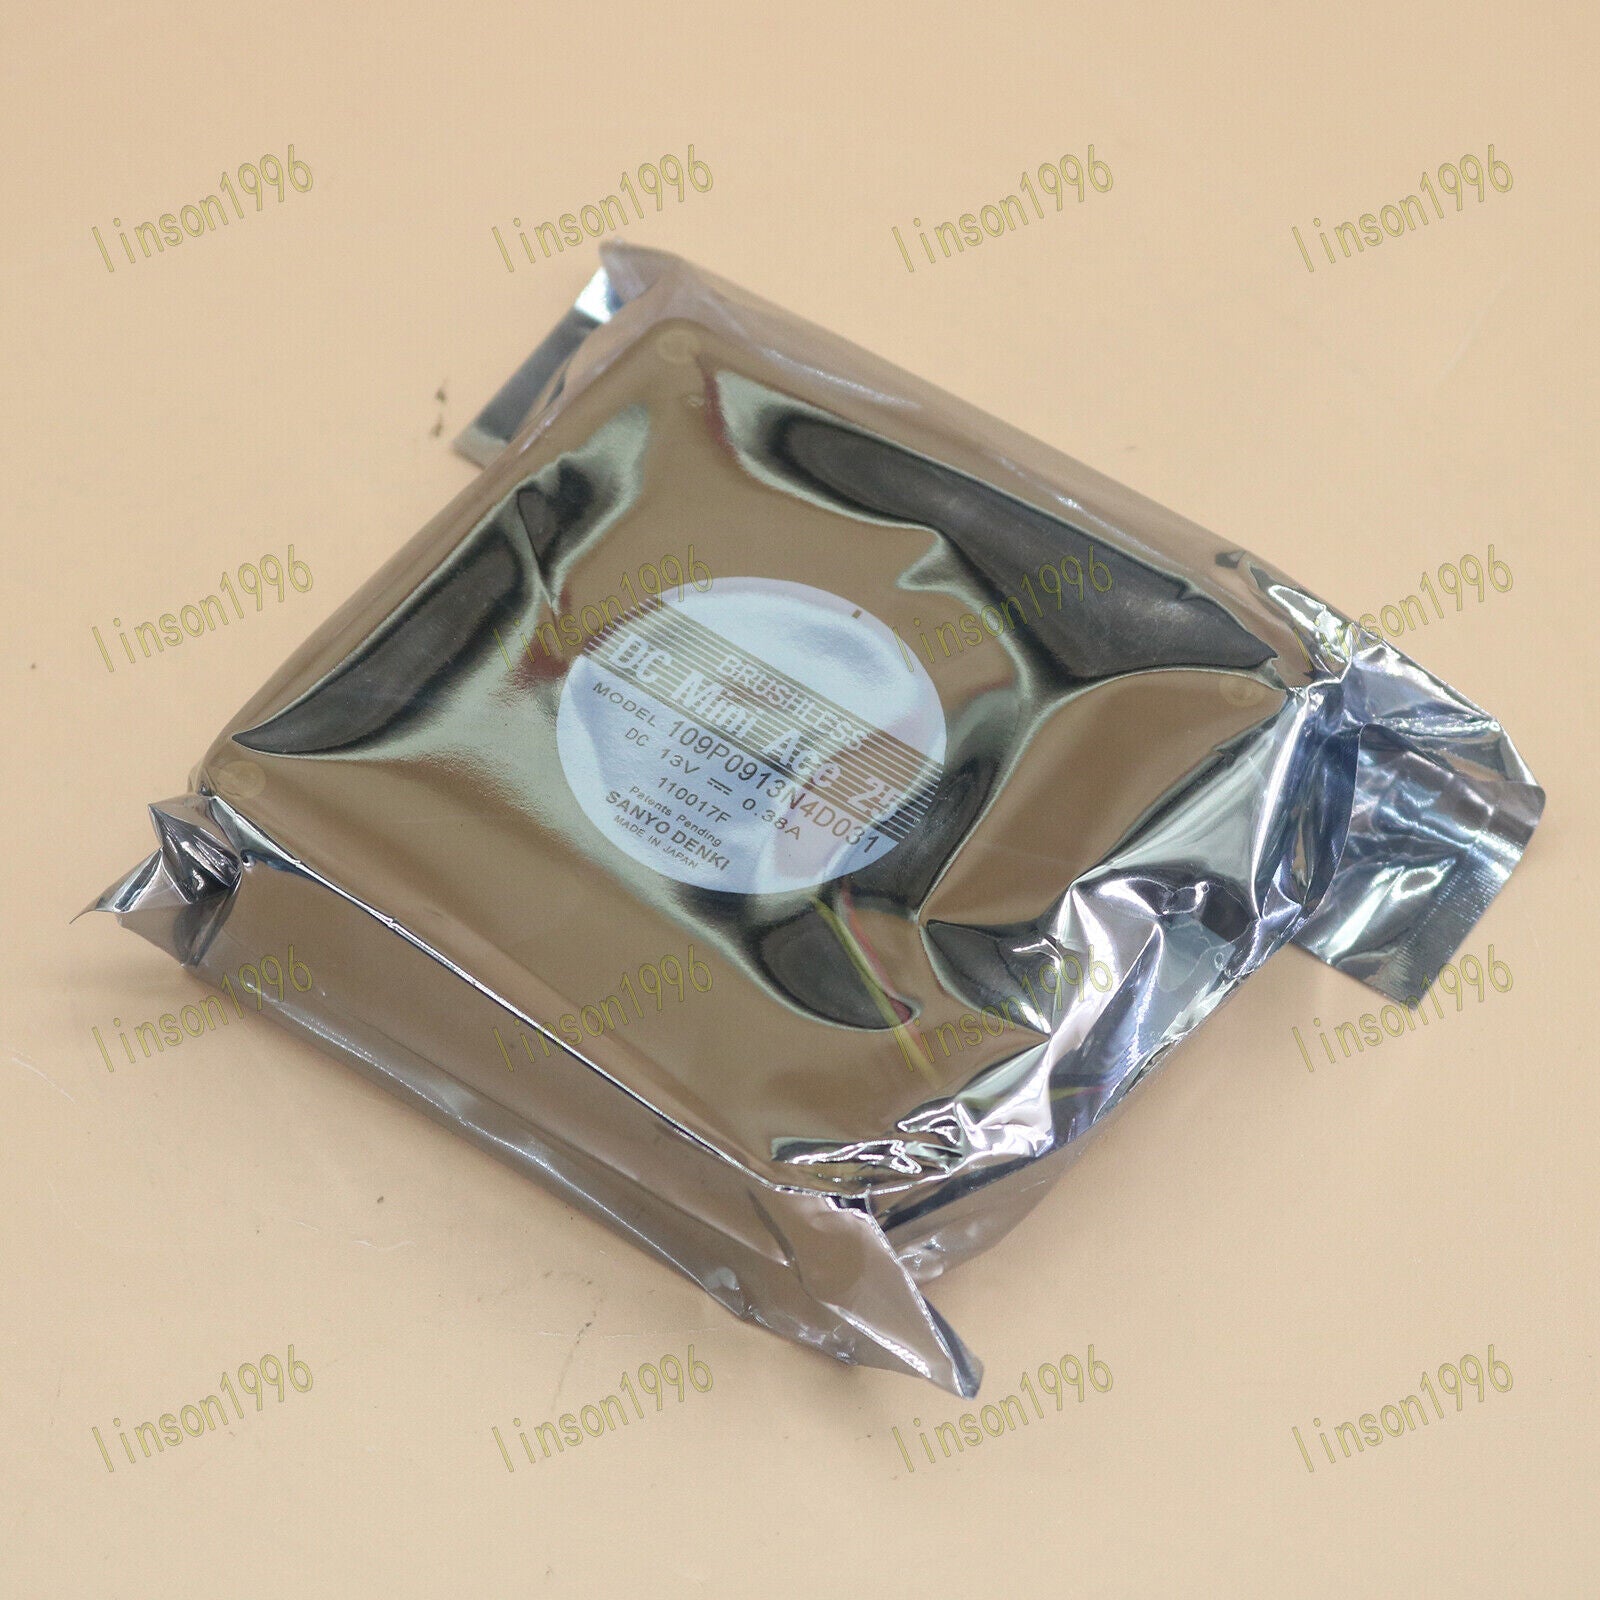 new  For Sanyo Fan 109P0913N4D031 13V 0.38A Fast ShiP